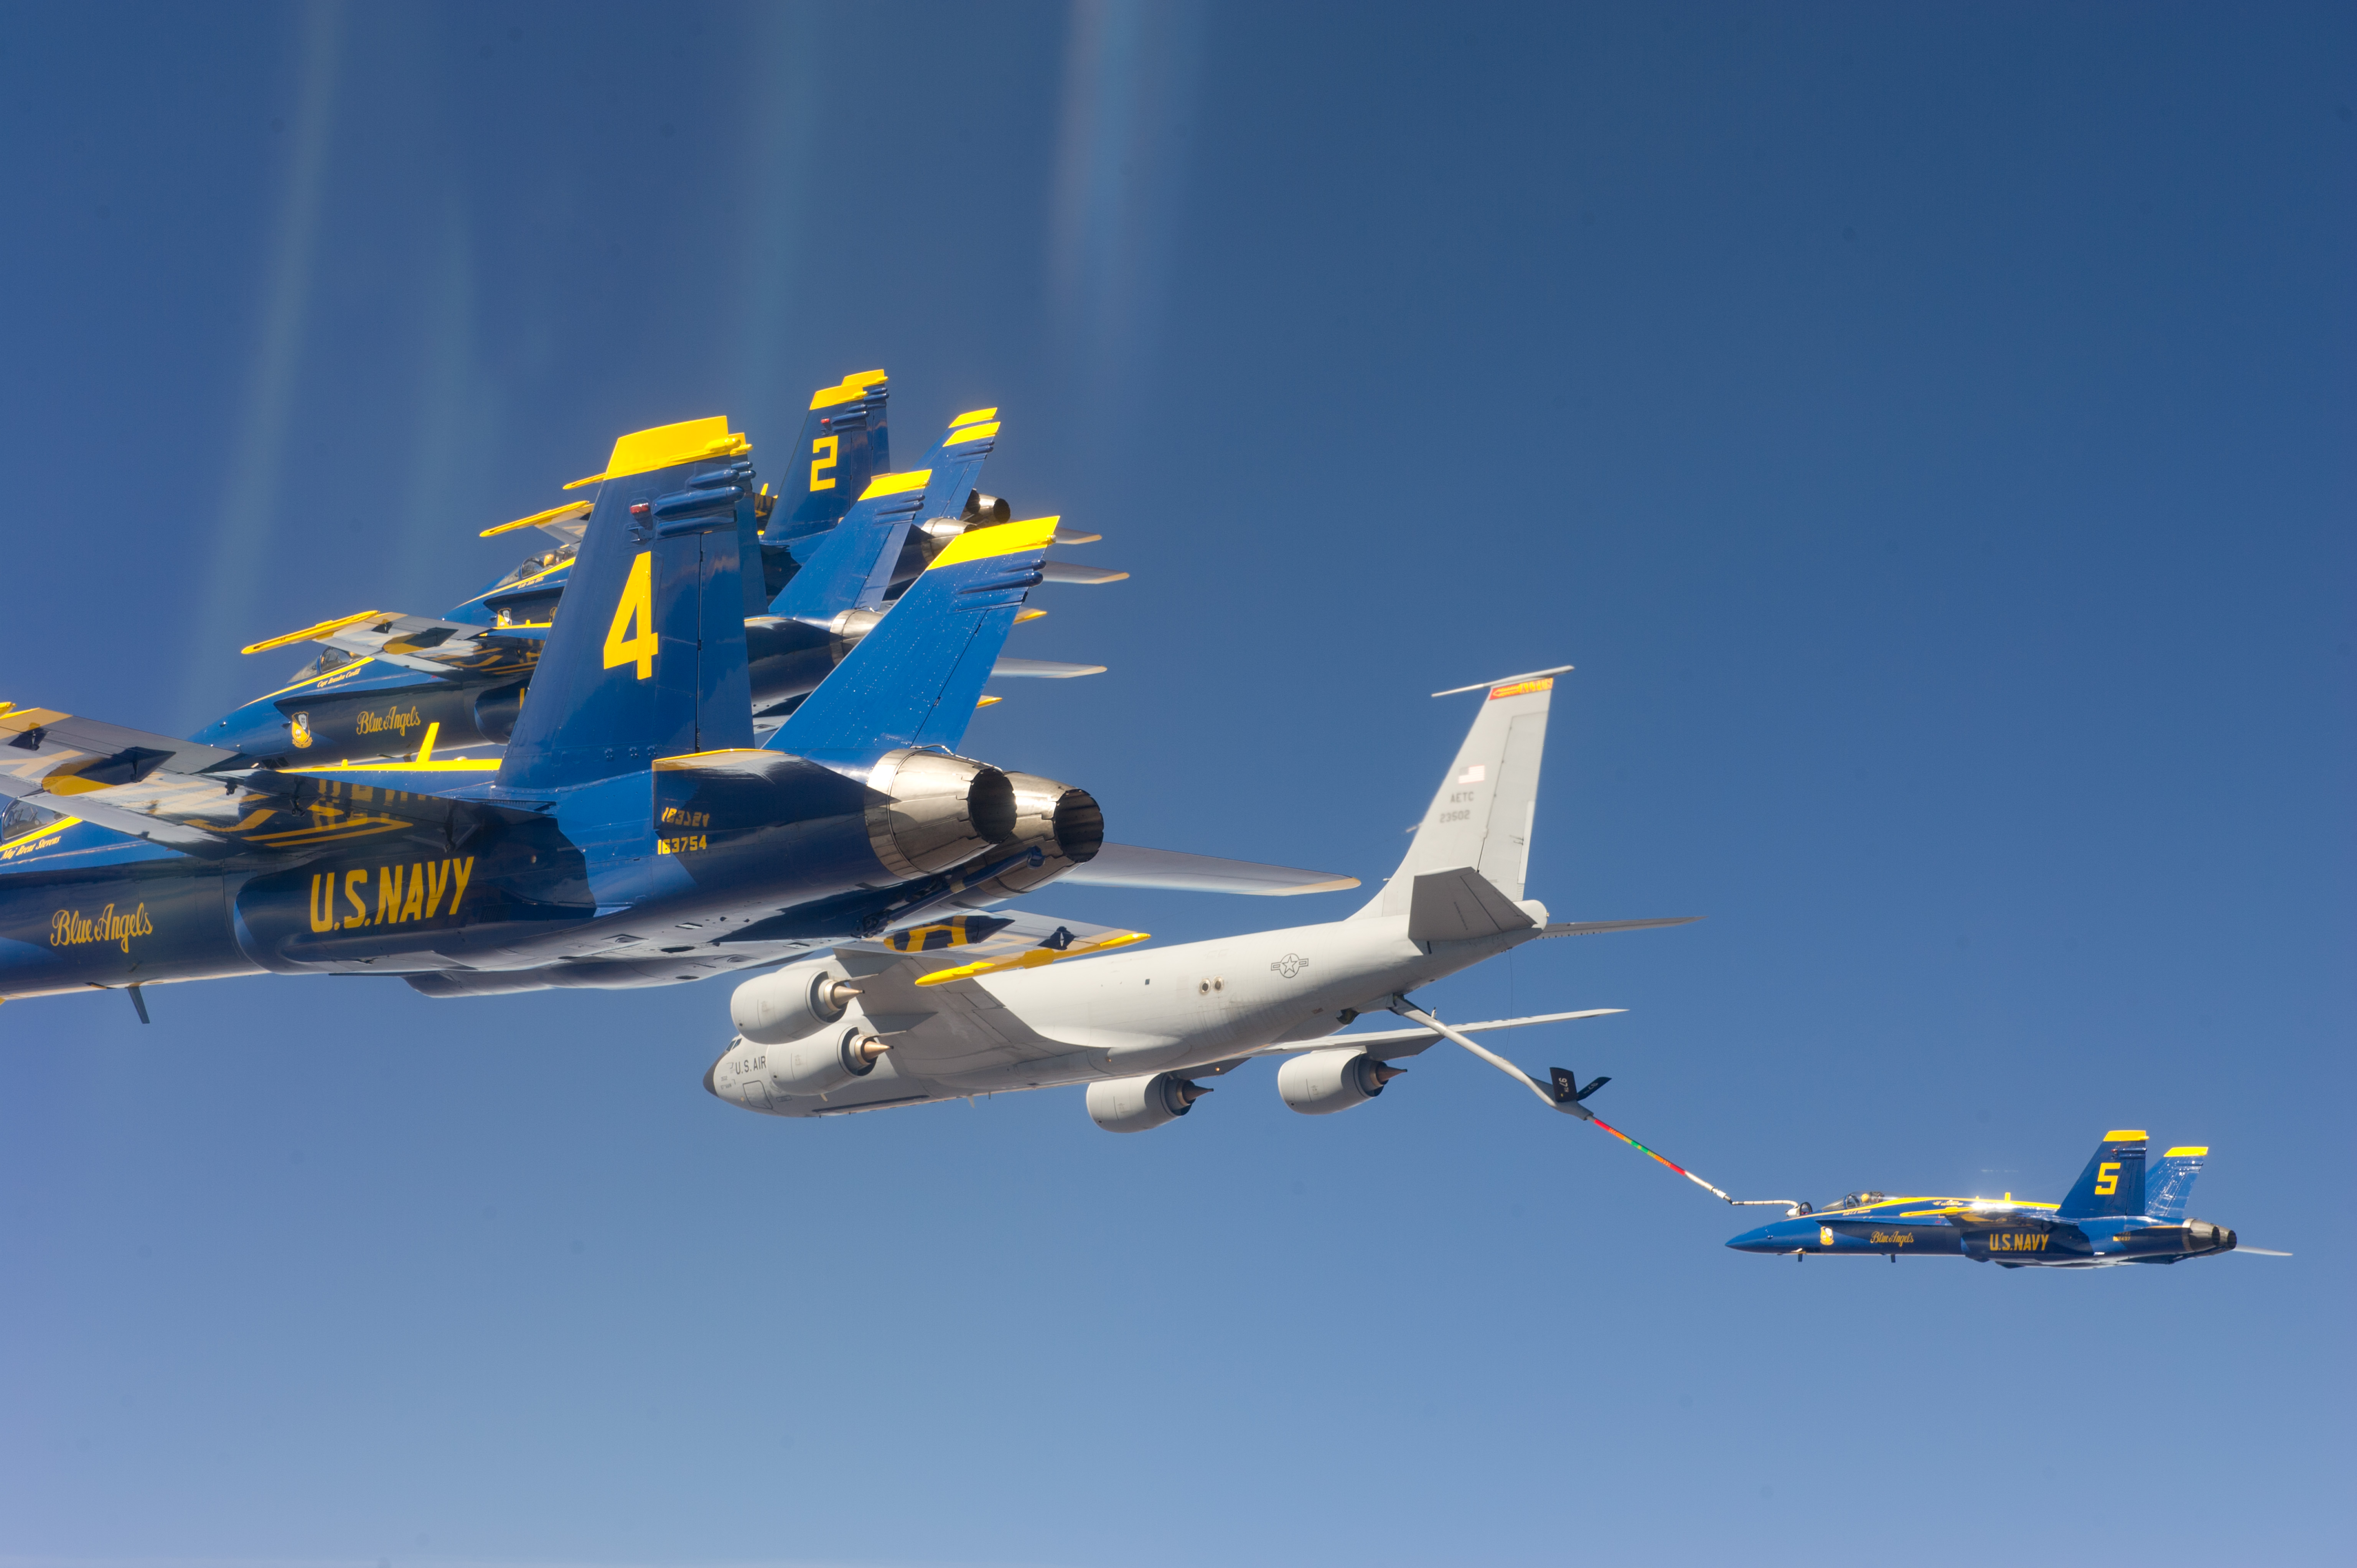 File:Flickr - Official U.S. Navy Imagery - Blue Angels refuel in ...